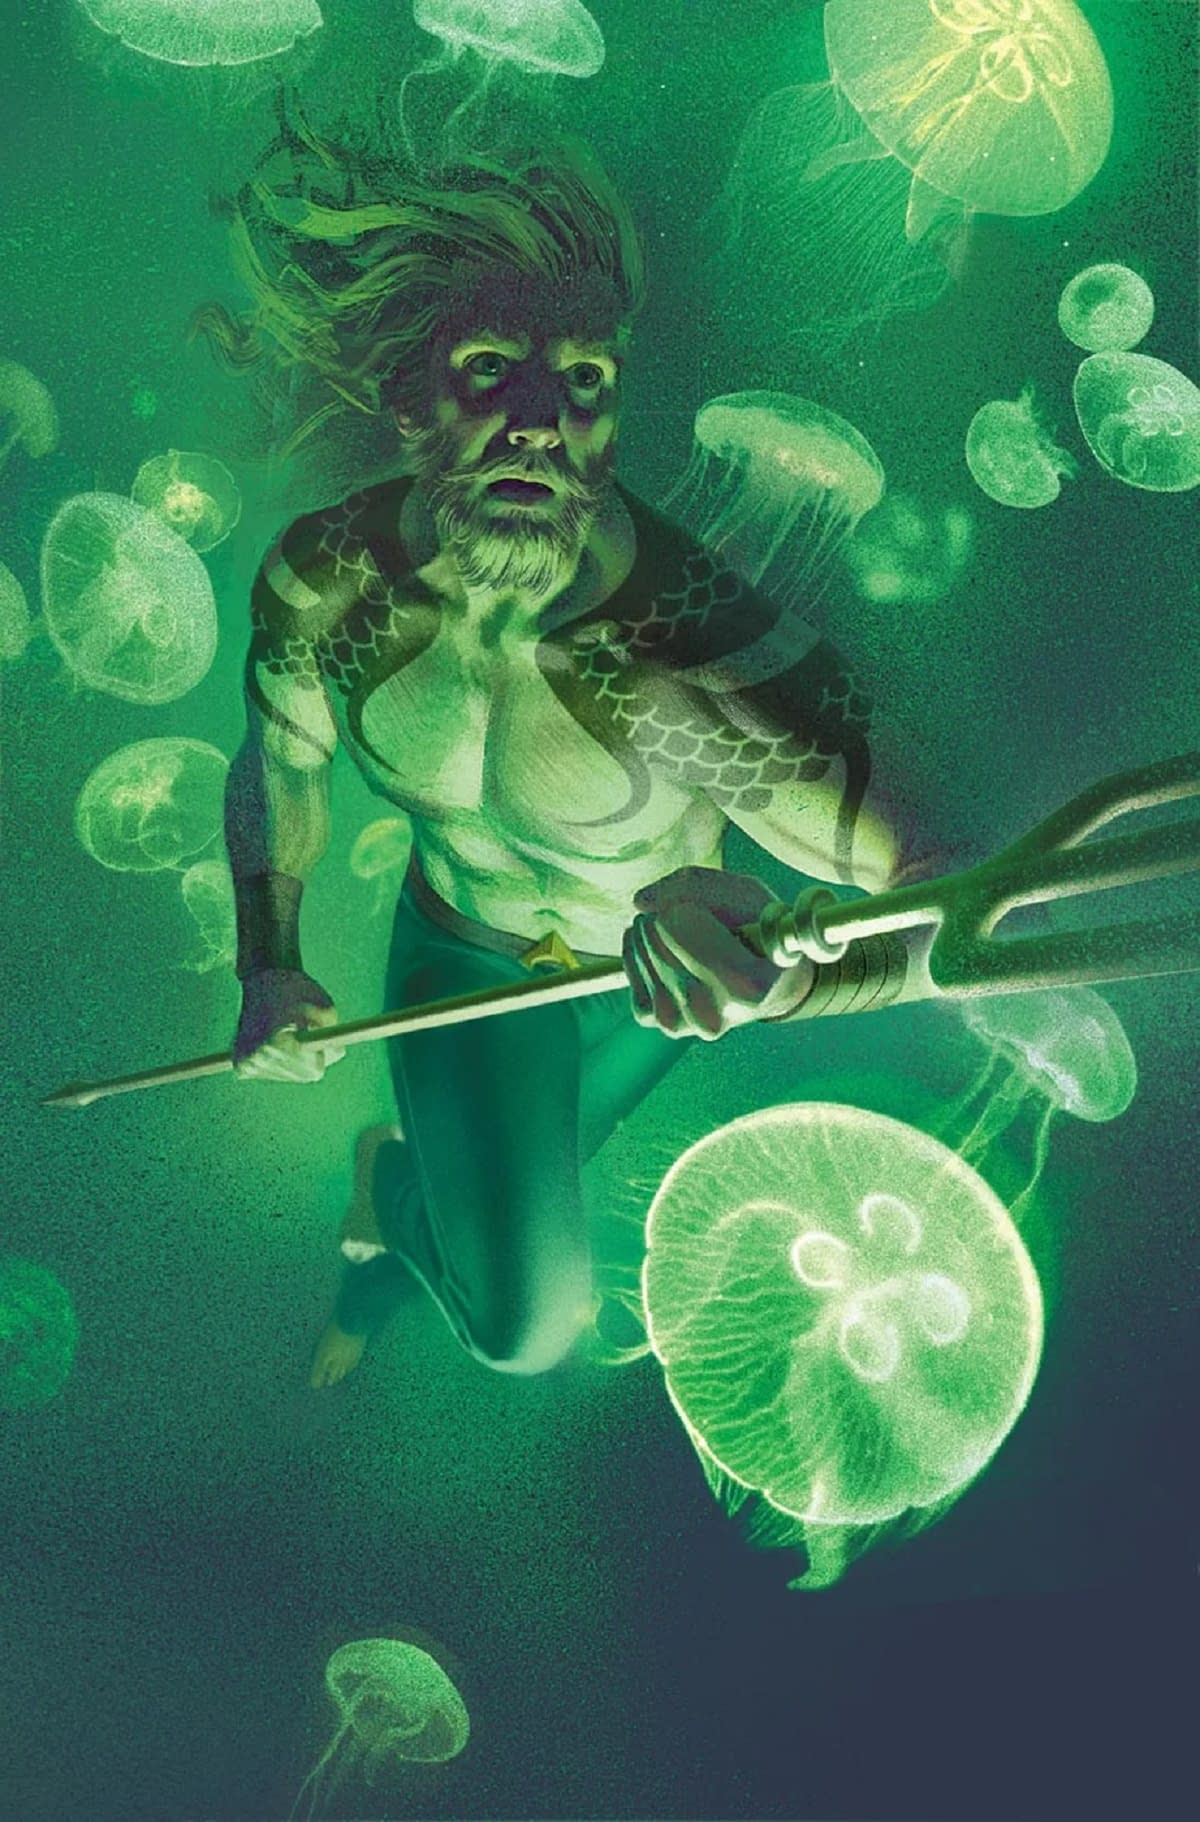 Black Manta Makes Late Father's Day Plans with Dead Dad in September's "Aquaman #52"